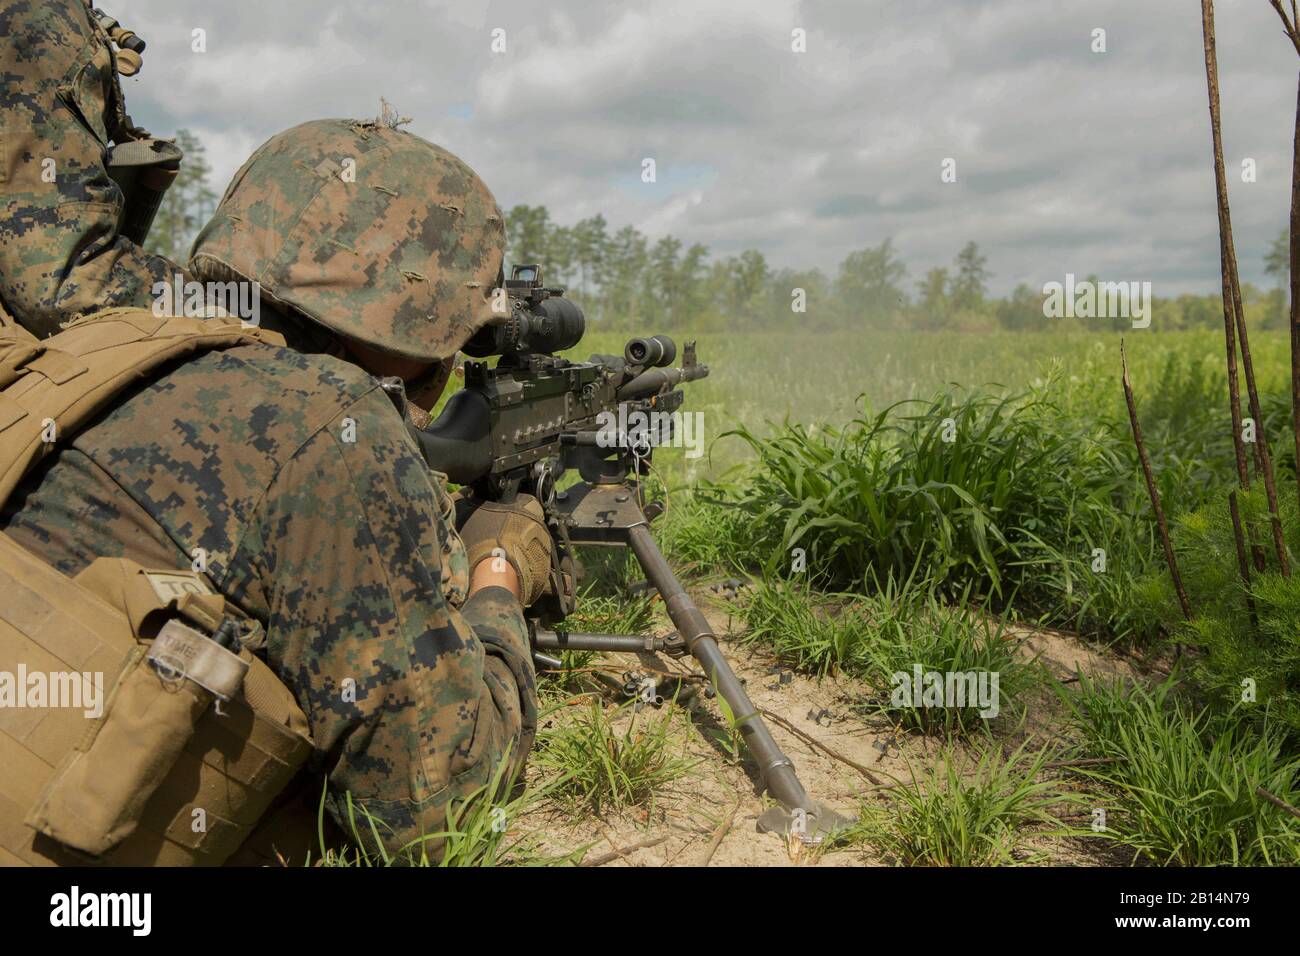 A U.S. Marine fires an M240B machine gun at a target during a company attack exercise at Fort A.P. Hill, Va., May 1, 2017. The Marines conducted a live-fire exercise that helped improve their leadership and teamwork abilities. The Marines are with G Company, 2nd Battalion, 2nd Marine Regiment. (U.S. Marine Corps photo by Pfc. Abrey D. Liggins) Stock Photo